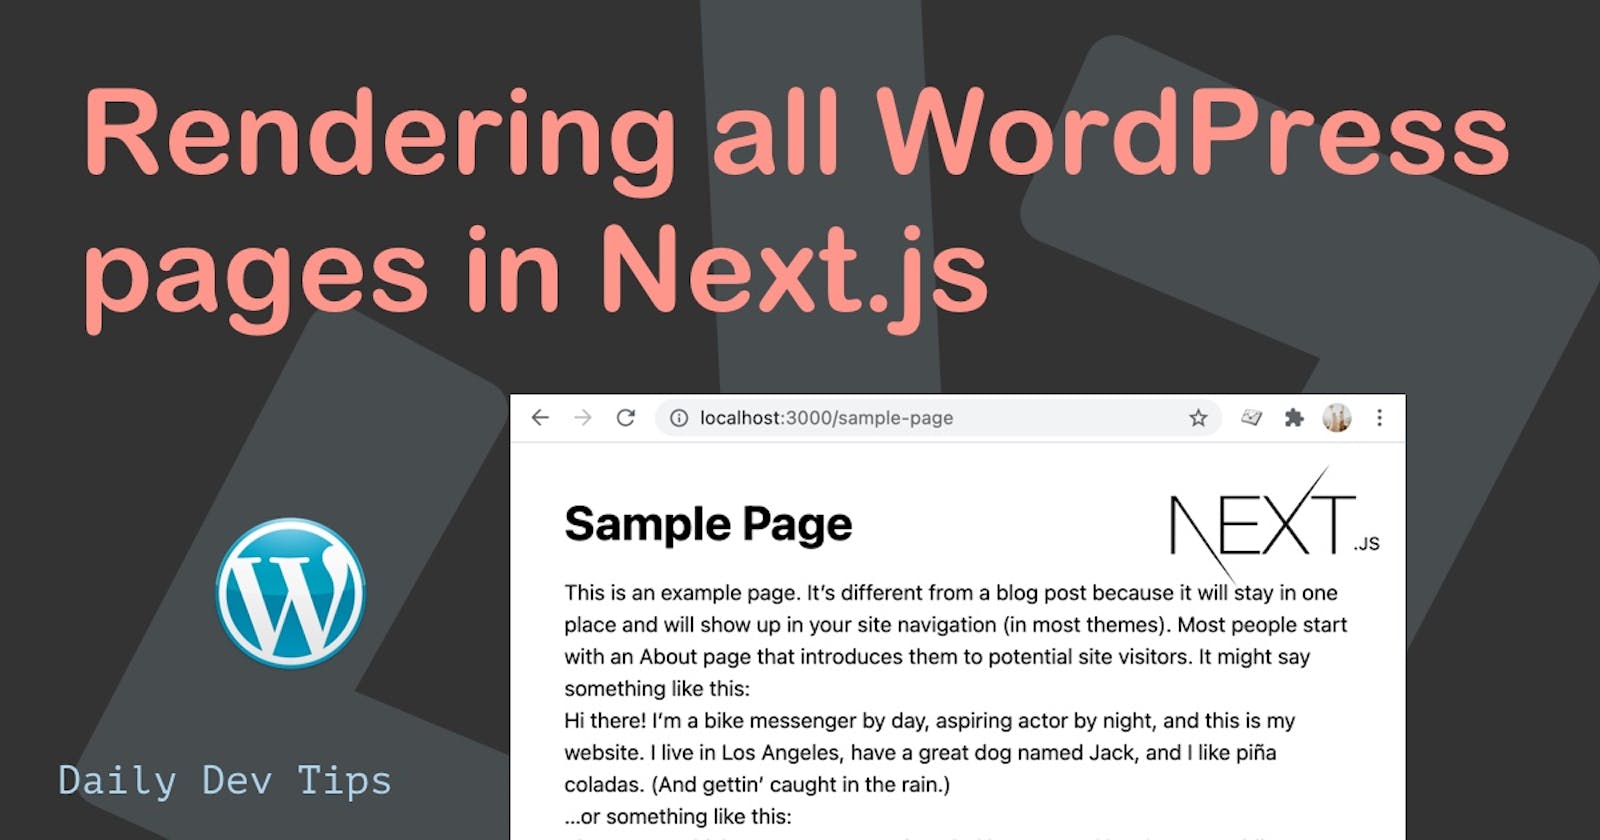 Rendering all WordPress pages in Next.js